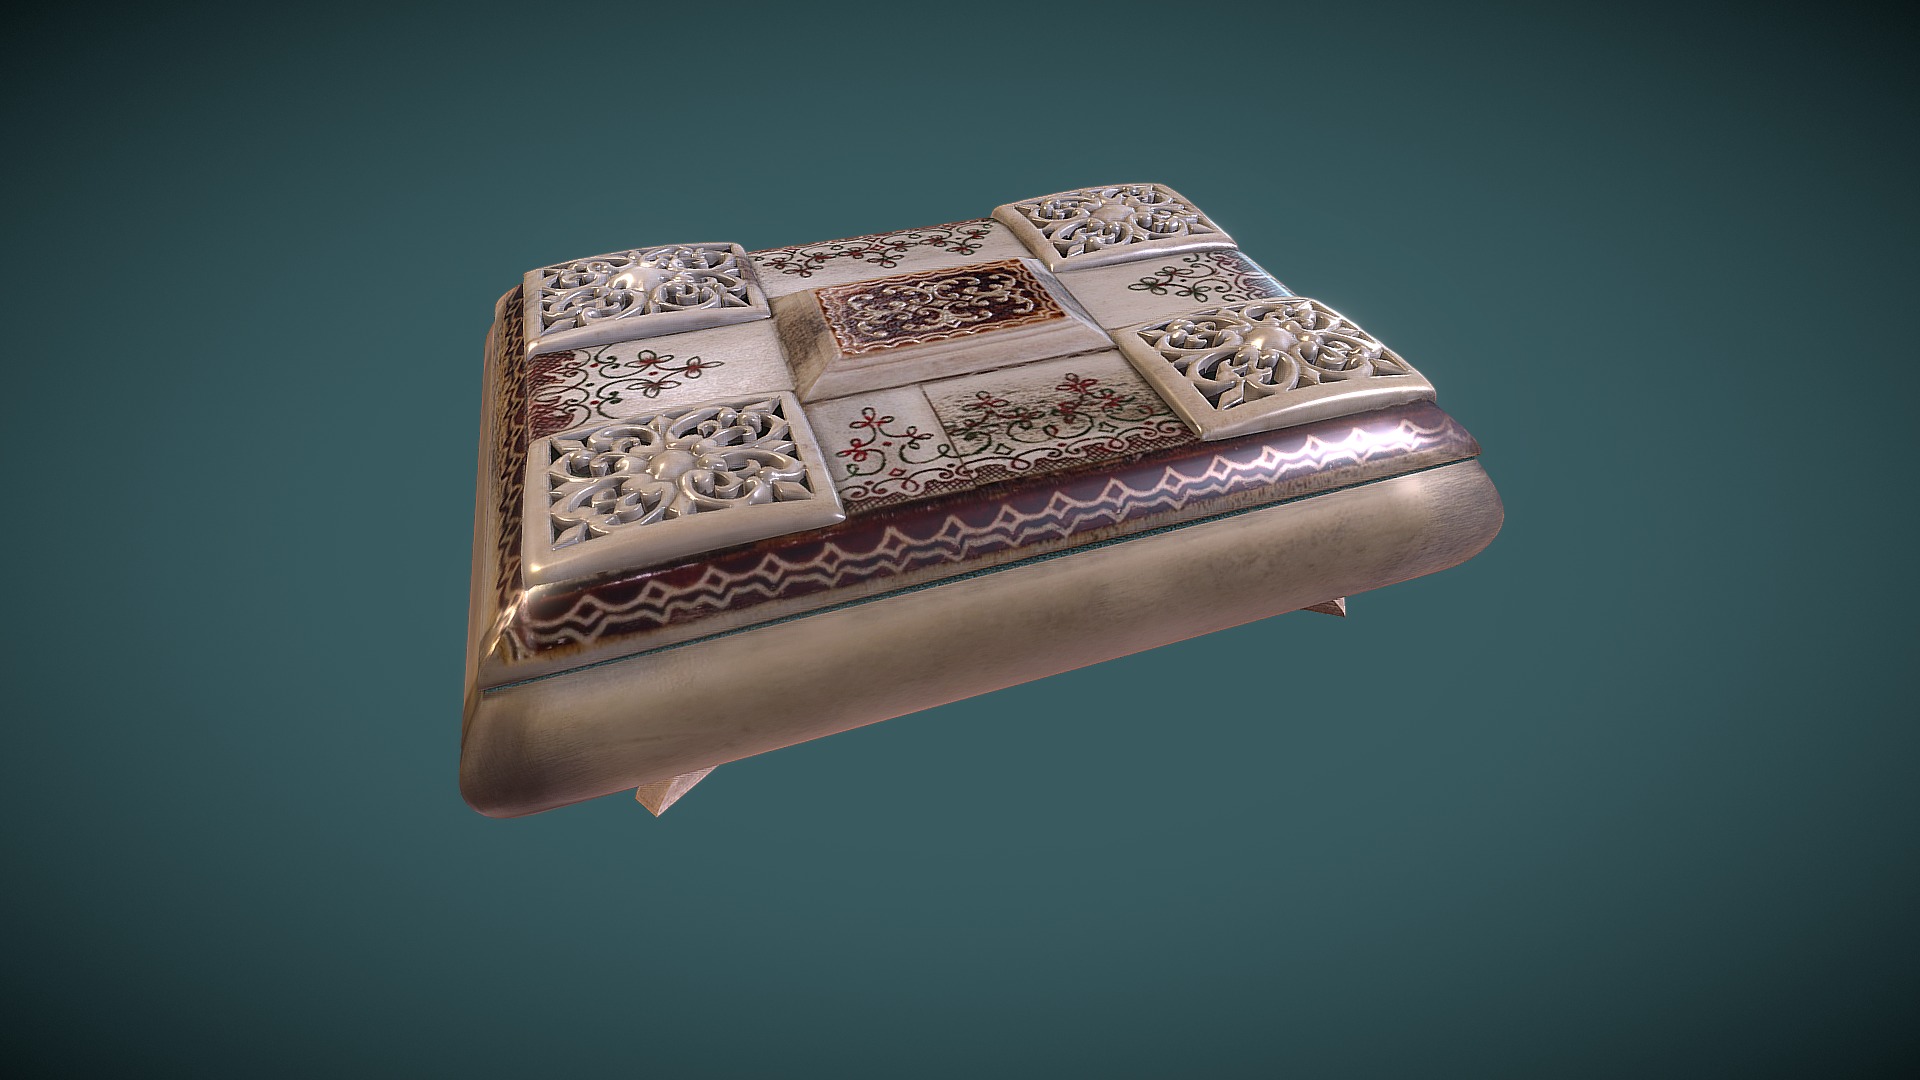 3D model Casket "Spring ornament" - This is a 3D model of the Casket "Spring ornament". The 3D model is about a box with a design on it.